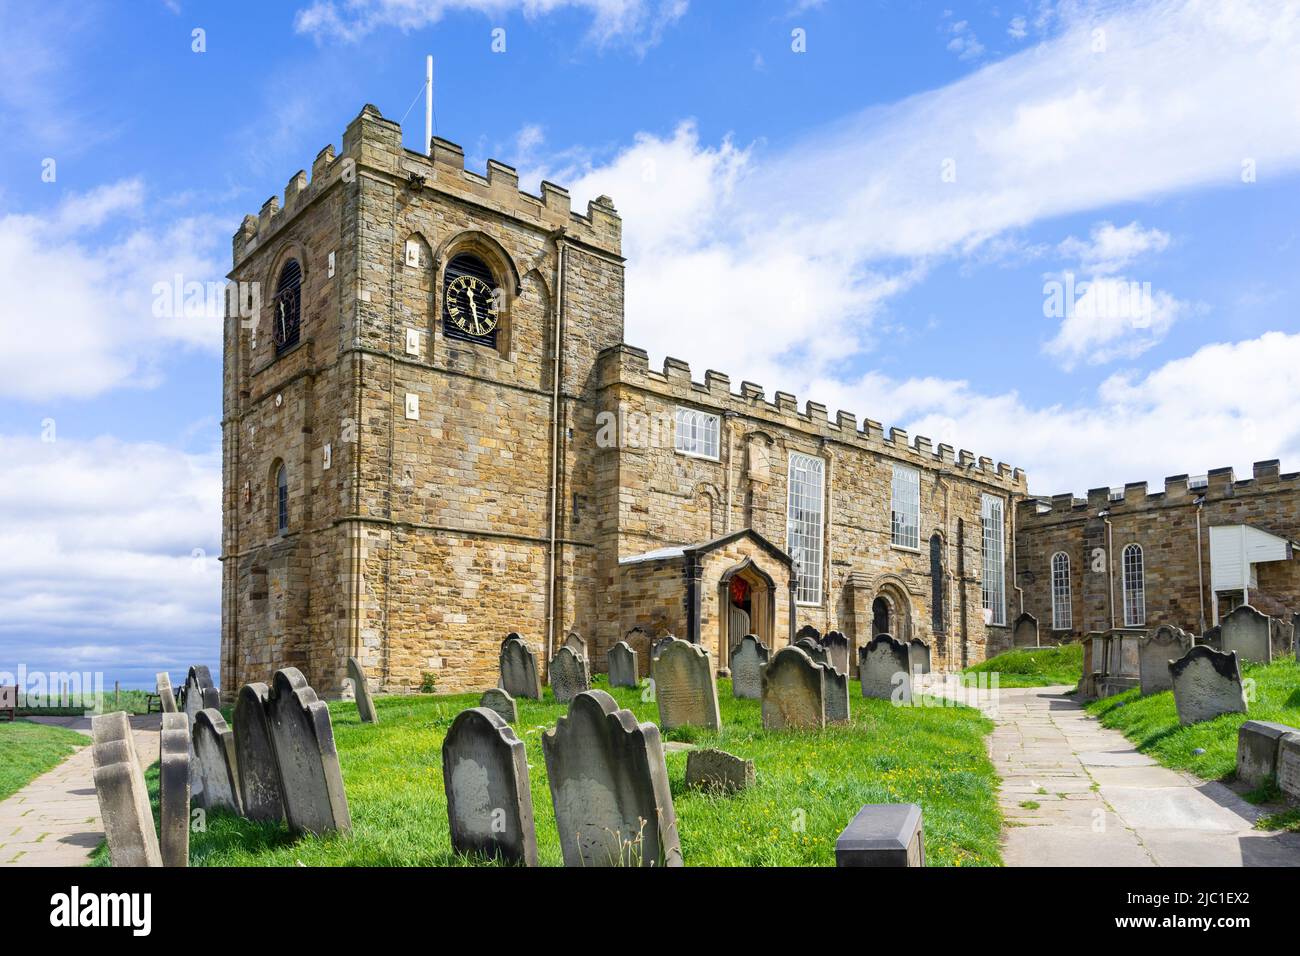 St Marys Churchyard Whitby featured in the novel Dracula by Bram Stoker Whitby Yorkshire Whitby North Yorkshire England Great Britain UK GB Europe Stock Photo